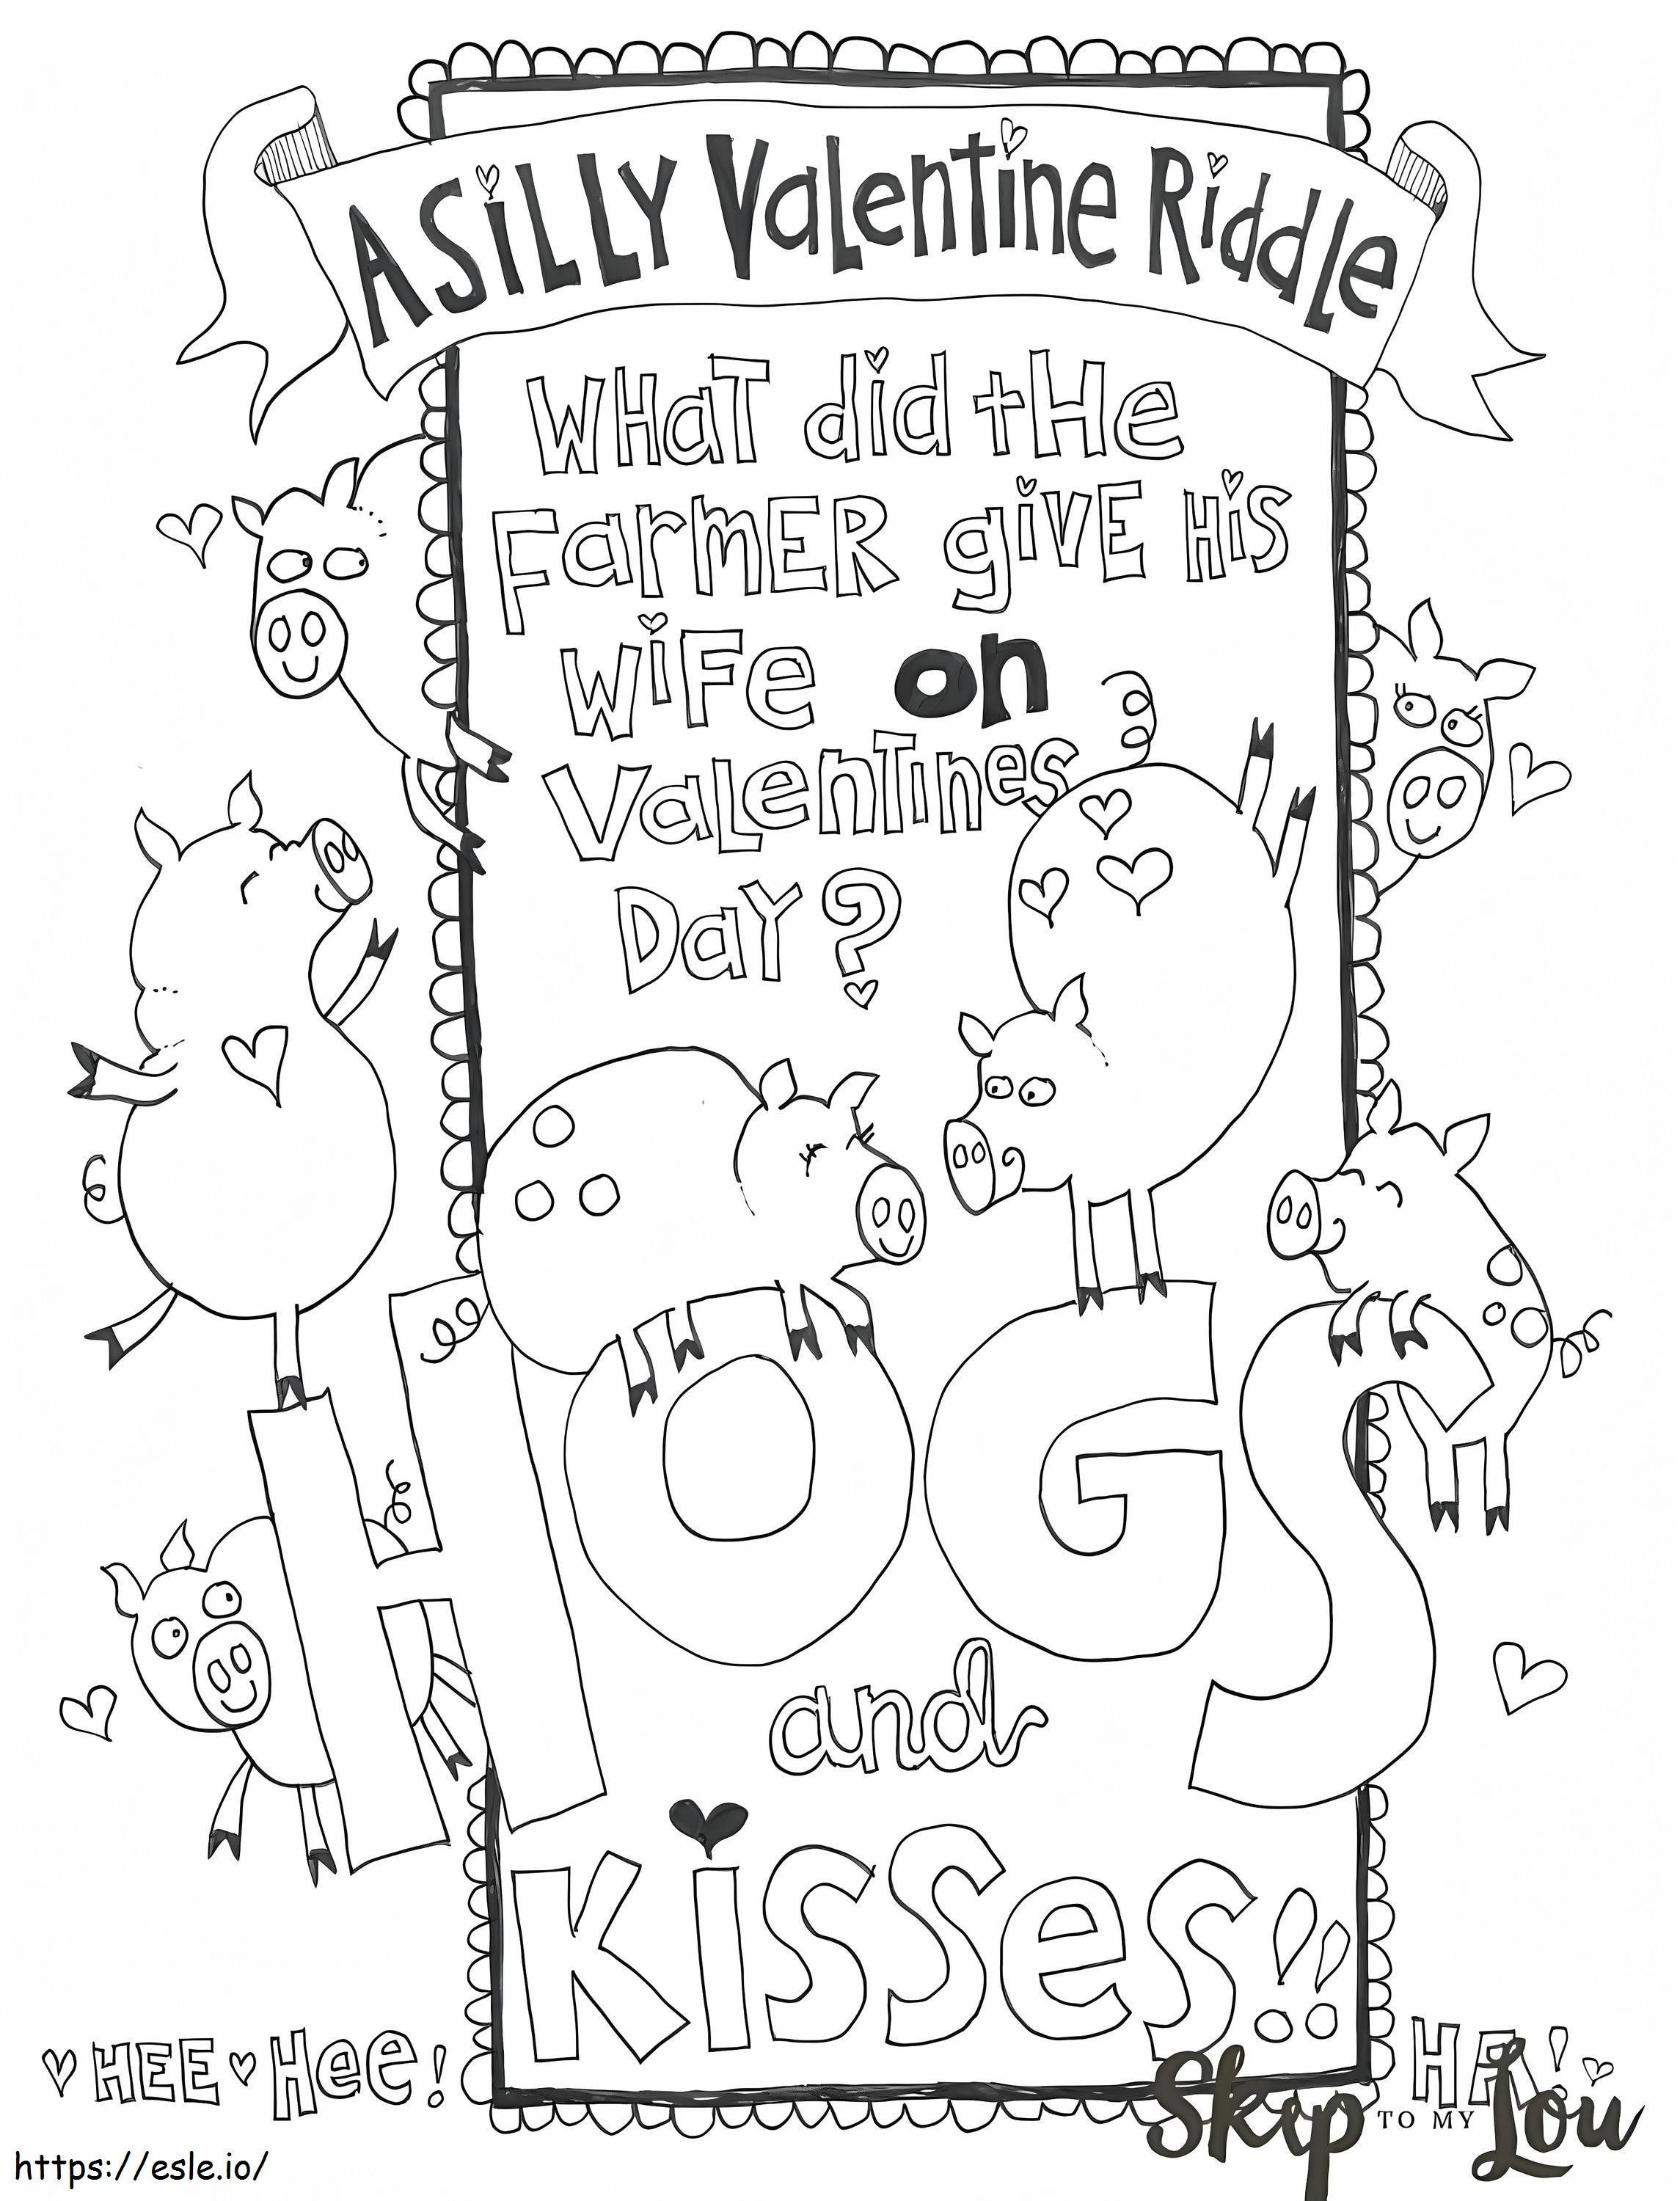 Happy Valentines Day 5 coloring page